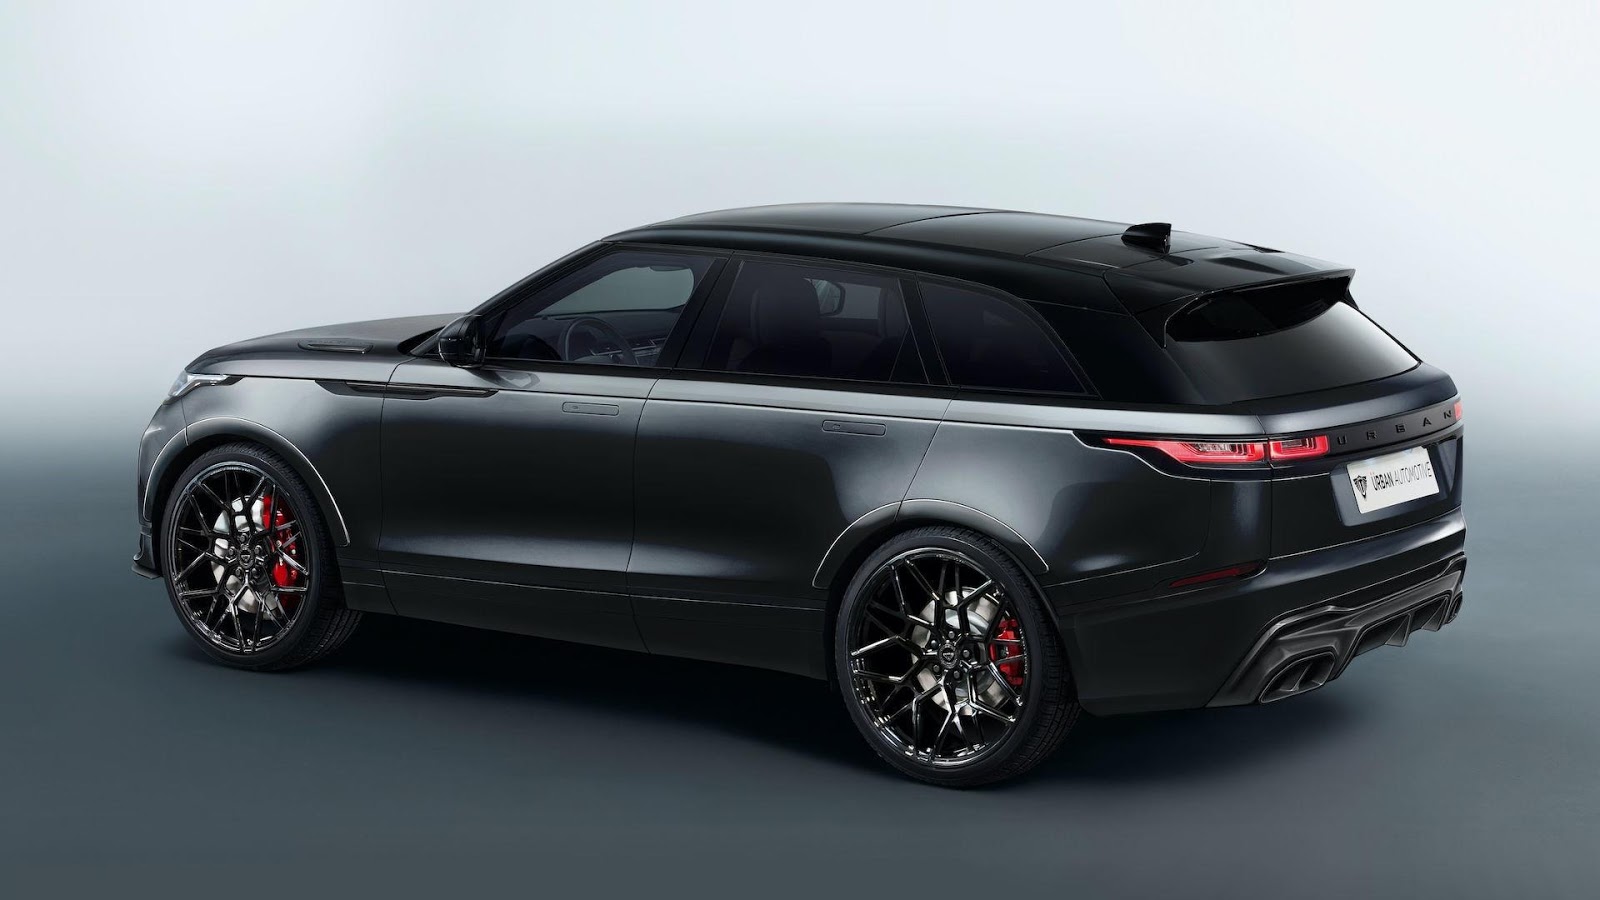 Urban Automotive's Range Rover Velar Is Almost An SVR | Carscoops